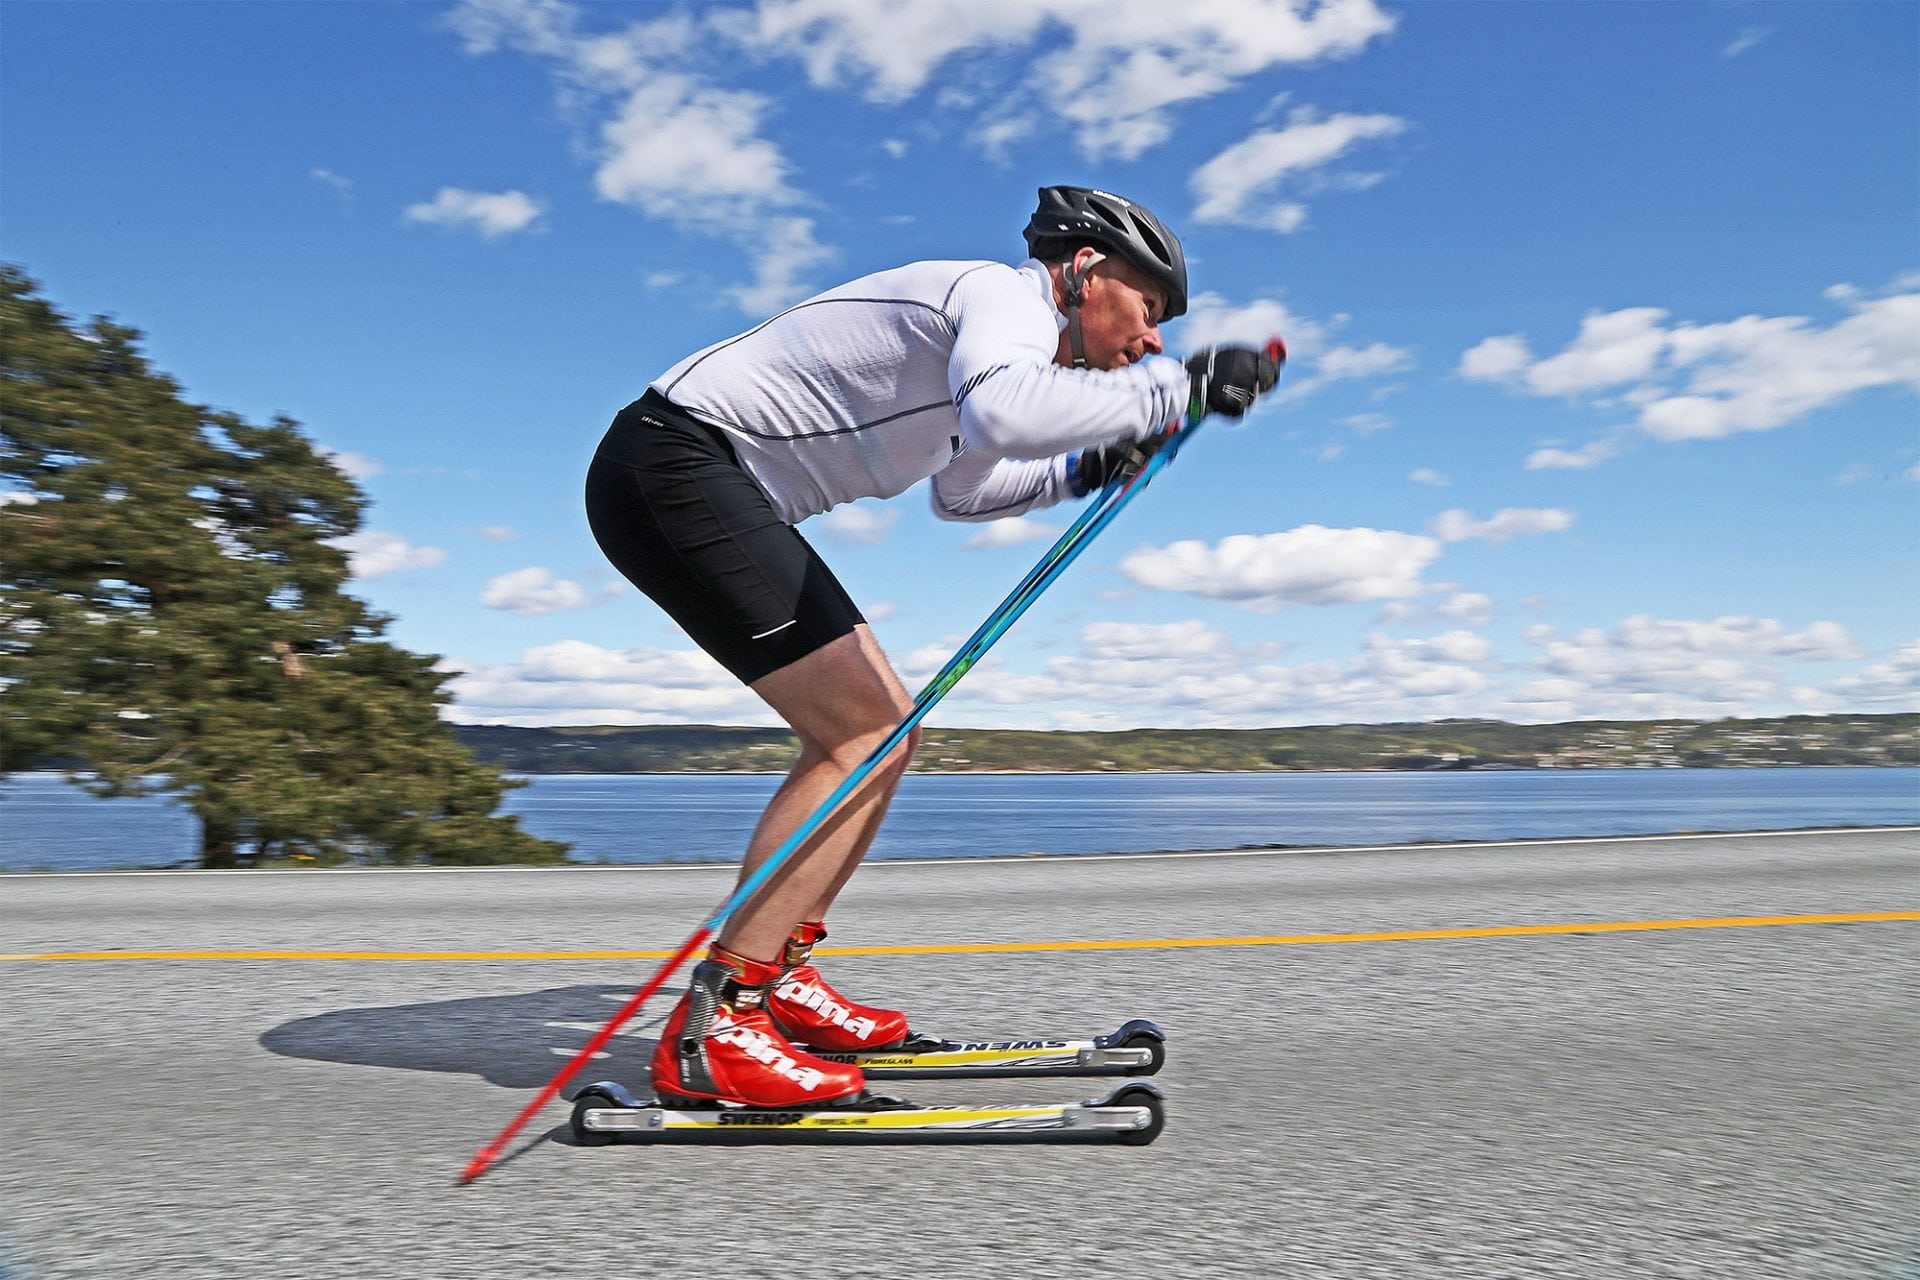 The most popular classic rollerski. Made of aluminium.|The most popular classic rollerski. Made of aluminium.|The most popular classic rollerski. Made of aluminium.|The most popular classic rollerski. Made of aluminium.|The most popular classic rollerski. Made of aluminium.|The most popular classic rollerski. Made of aluminium.|The most popular classic rollerski. Made of aluminium.|The most popular classic rollerski. Made of aluminium.